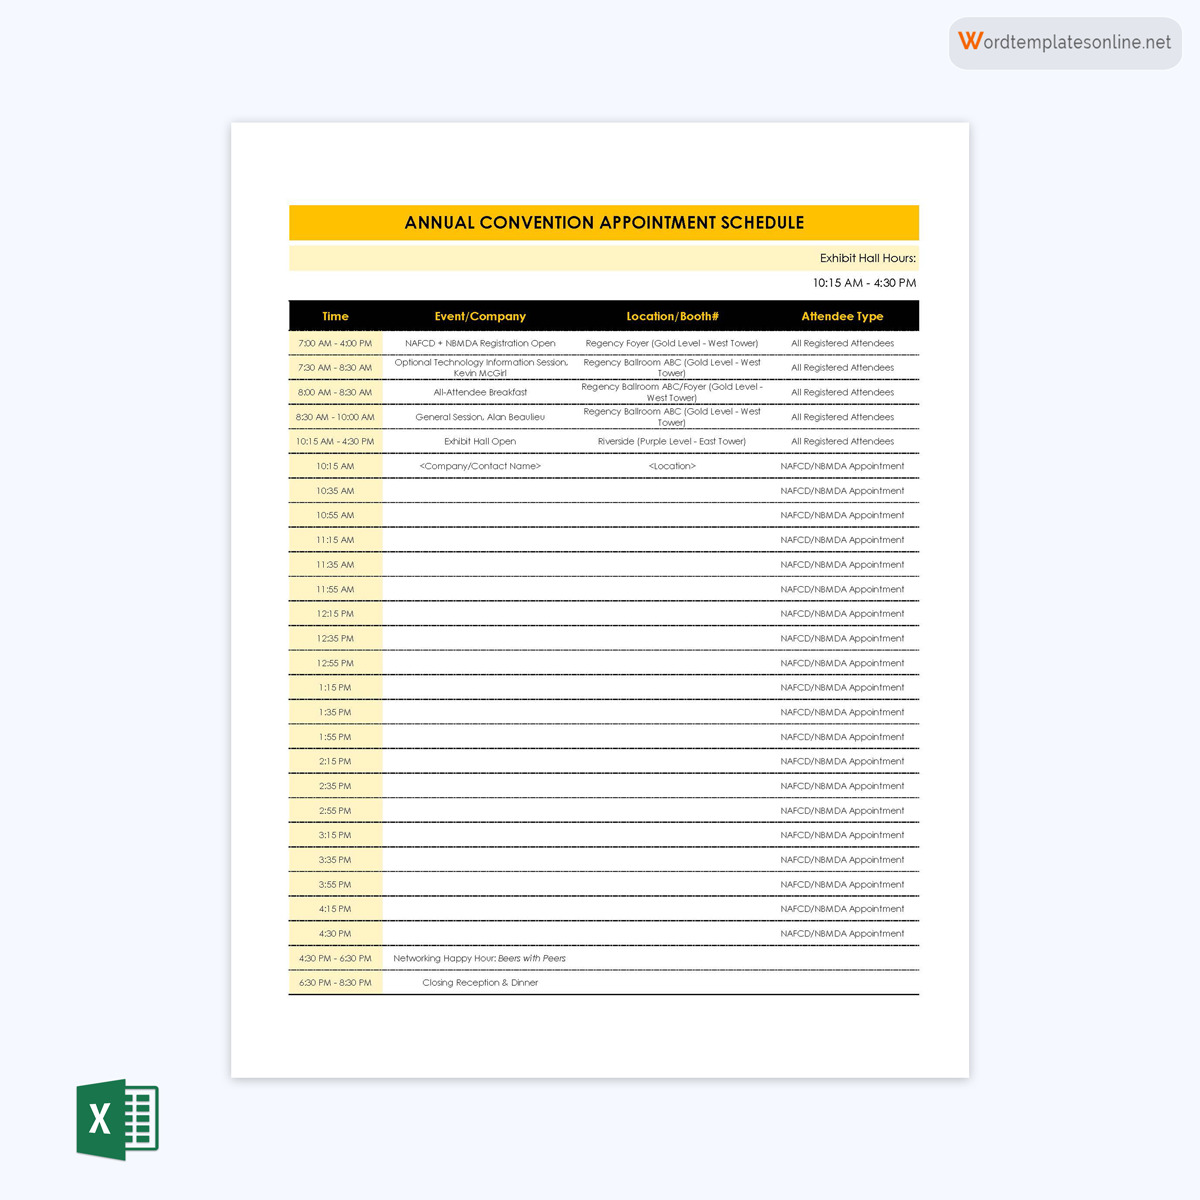 Free Printable Annual Convention Appointment Schedule Template as Excel Sheet